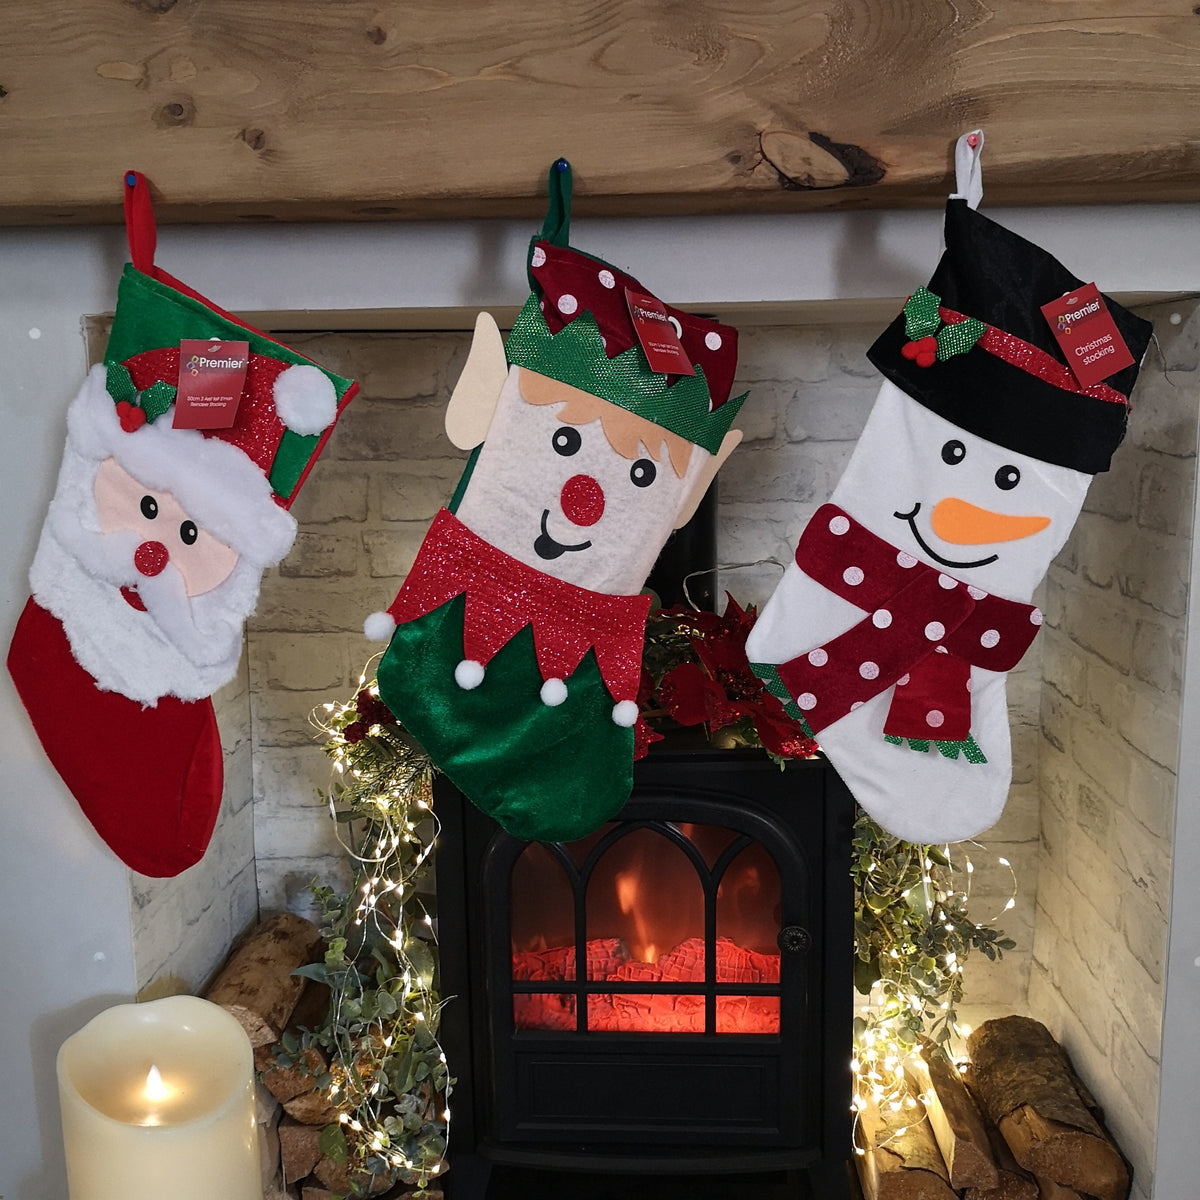 Bulk of 36 Hanging Christmas Stockings with 3 Different Designs - Santa, Snowman & Elf